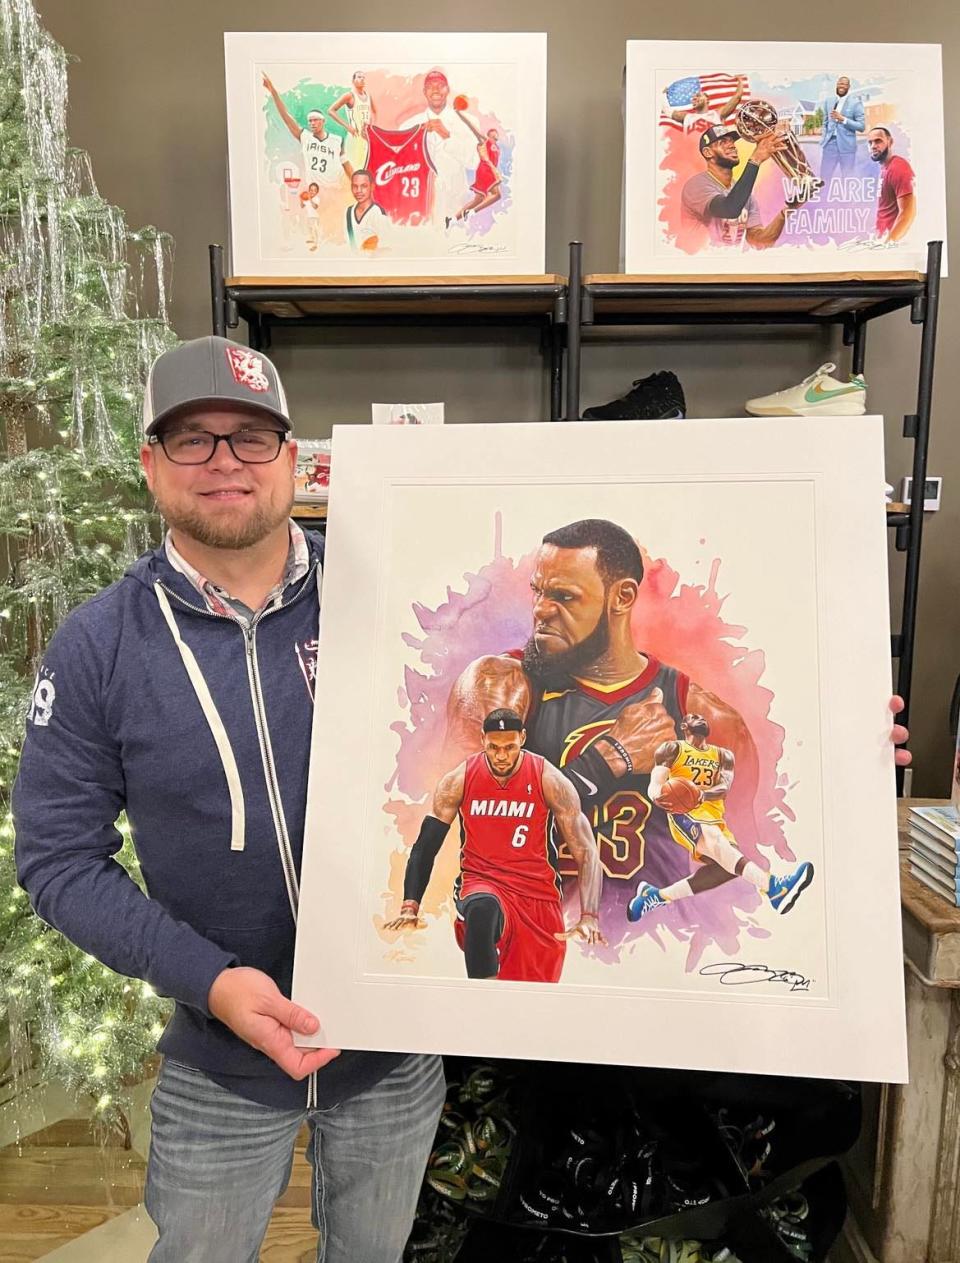 Stark County artist Dirk Rozich displays a painting he created of LeBron James that was digitally enlarged into a mural at the LeBron James' Home Court museum in Akron.